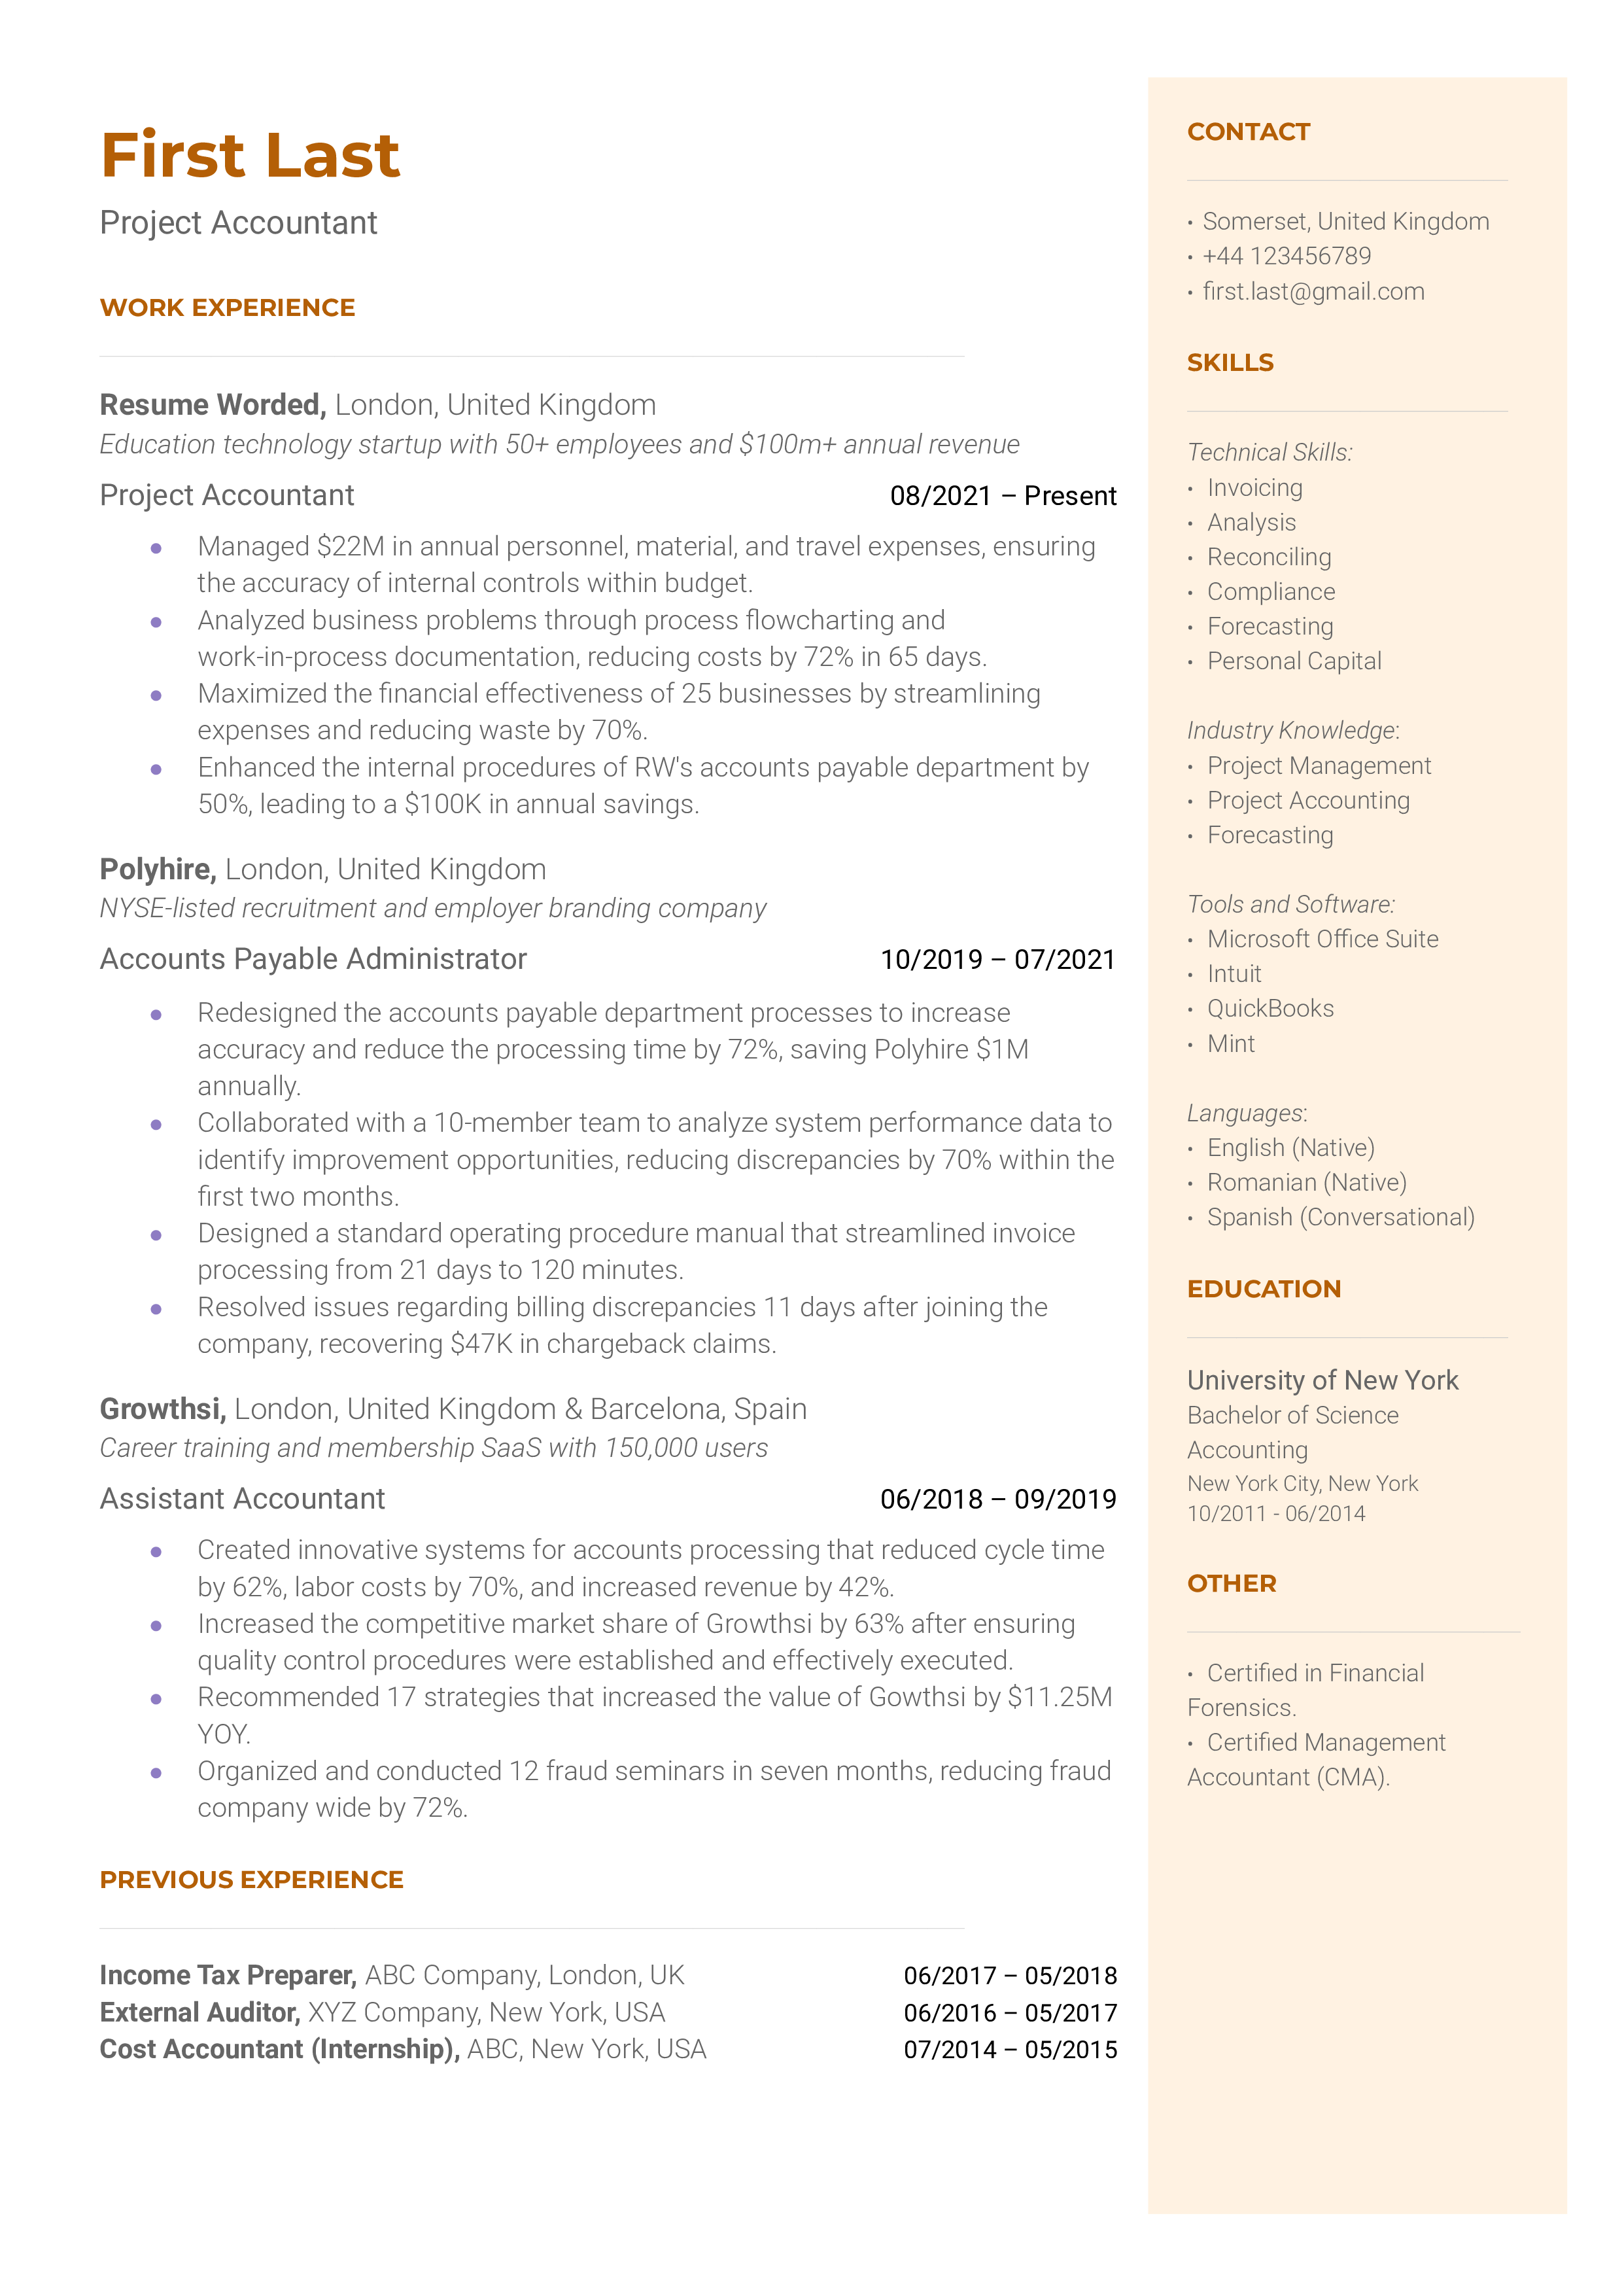 A well-structured CV for a Project Accountant role showcasing software proficiency and project-specific achievements.